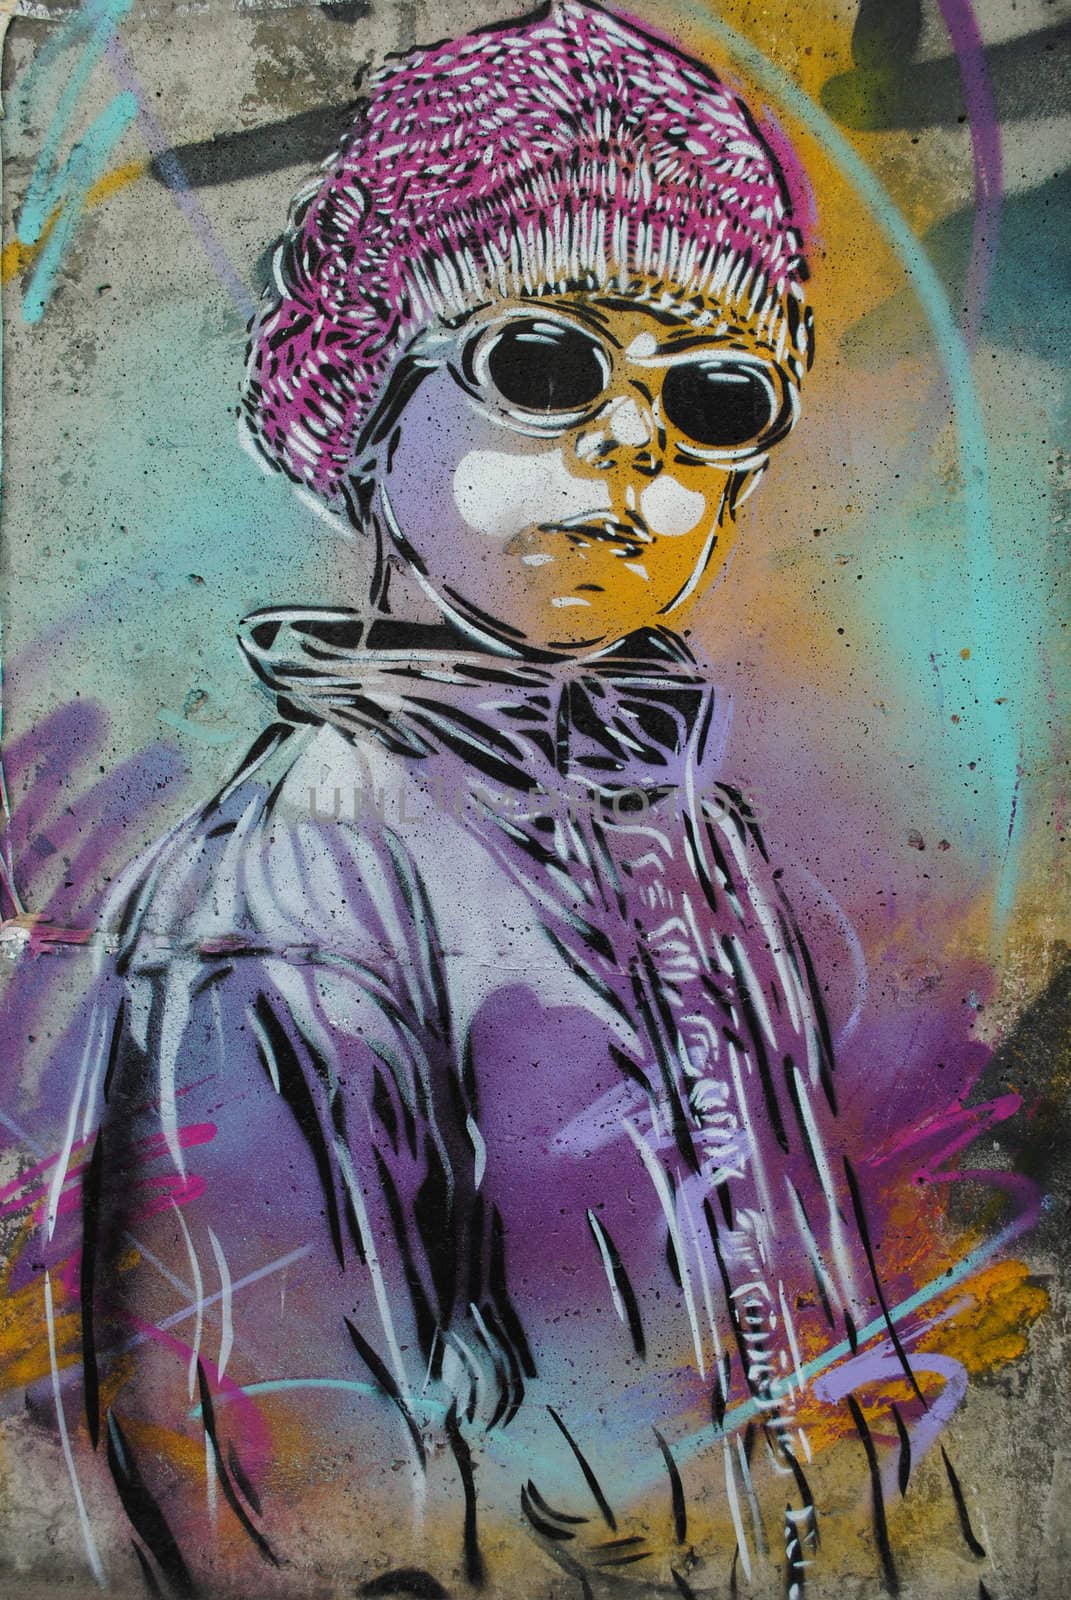 A hip graffiti character with sunglasses.